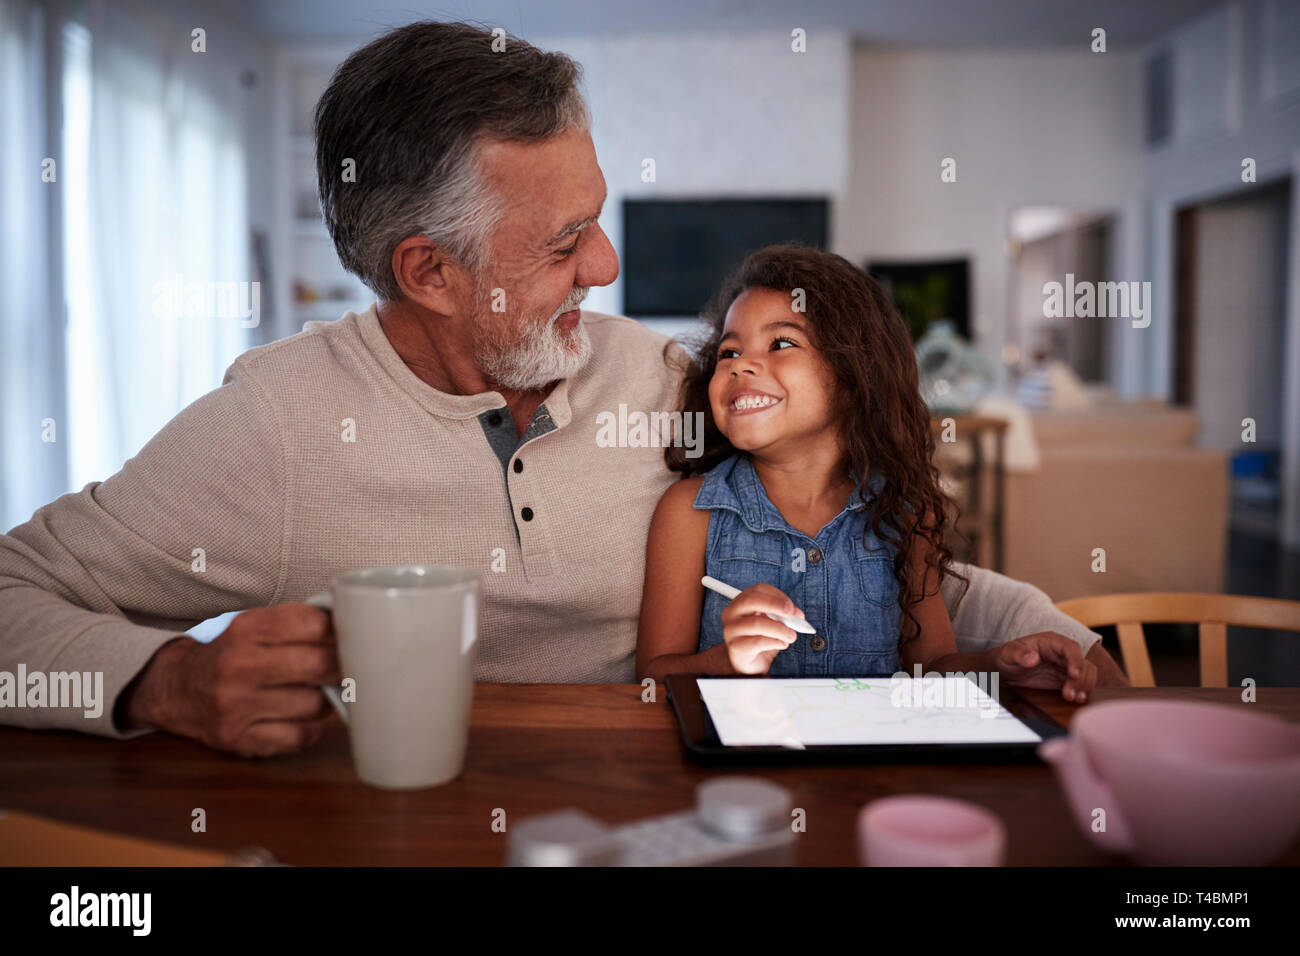 Senior Hispanic man with his granddaughter using tablet computer, looking at each other, front view Stock Photo